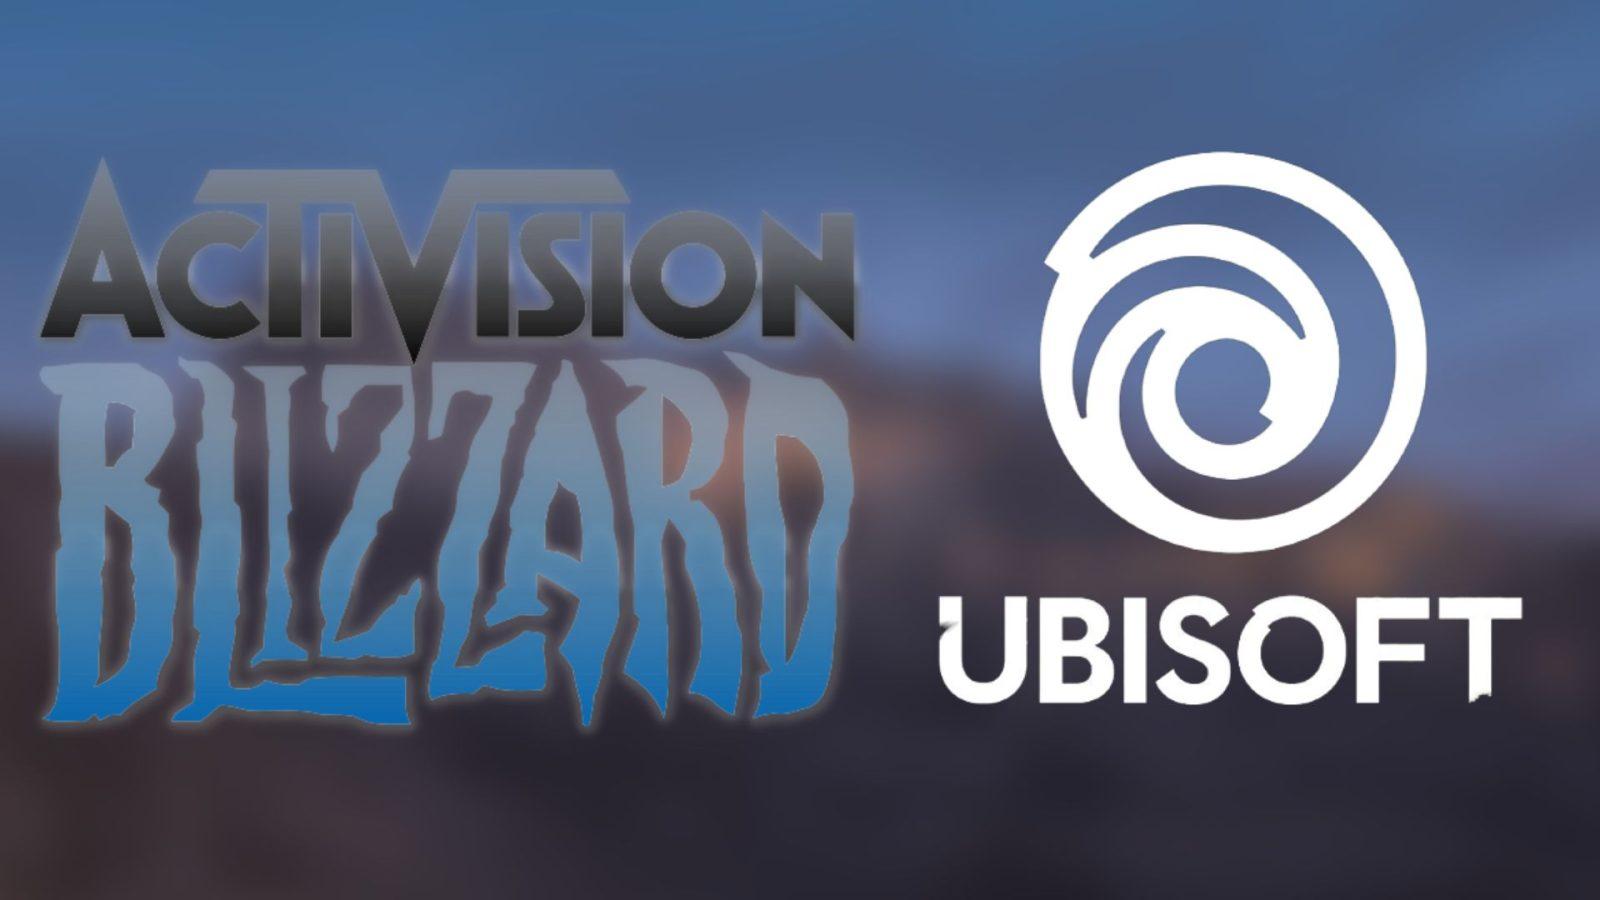 Activision Blizzard and Ubisoft logos